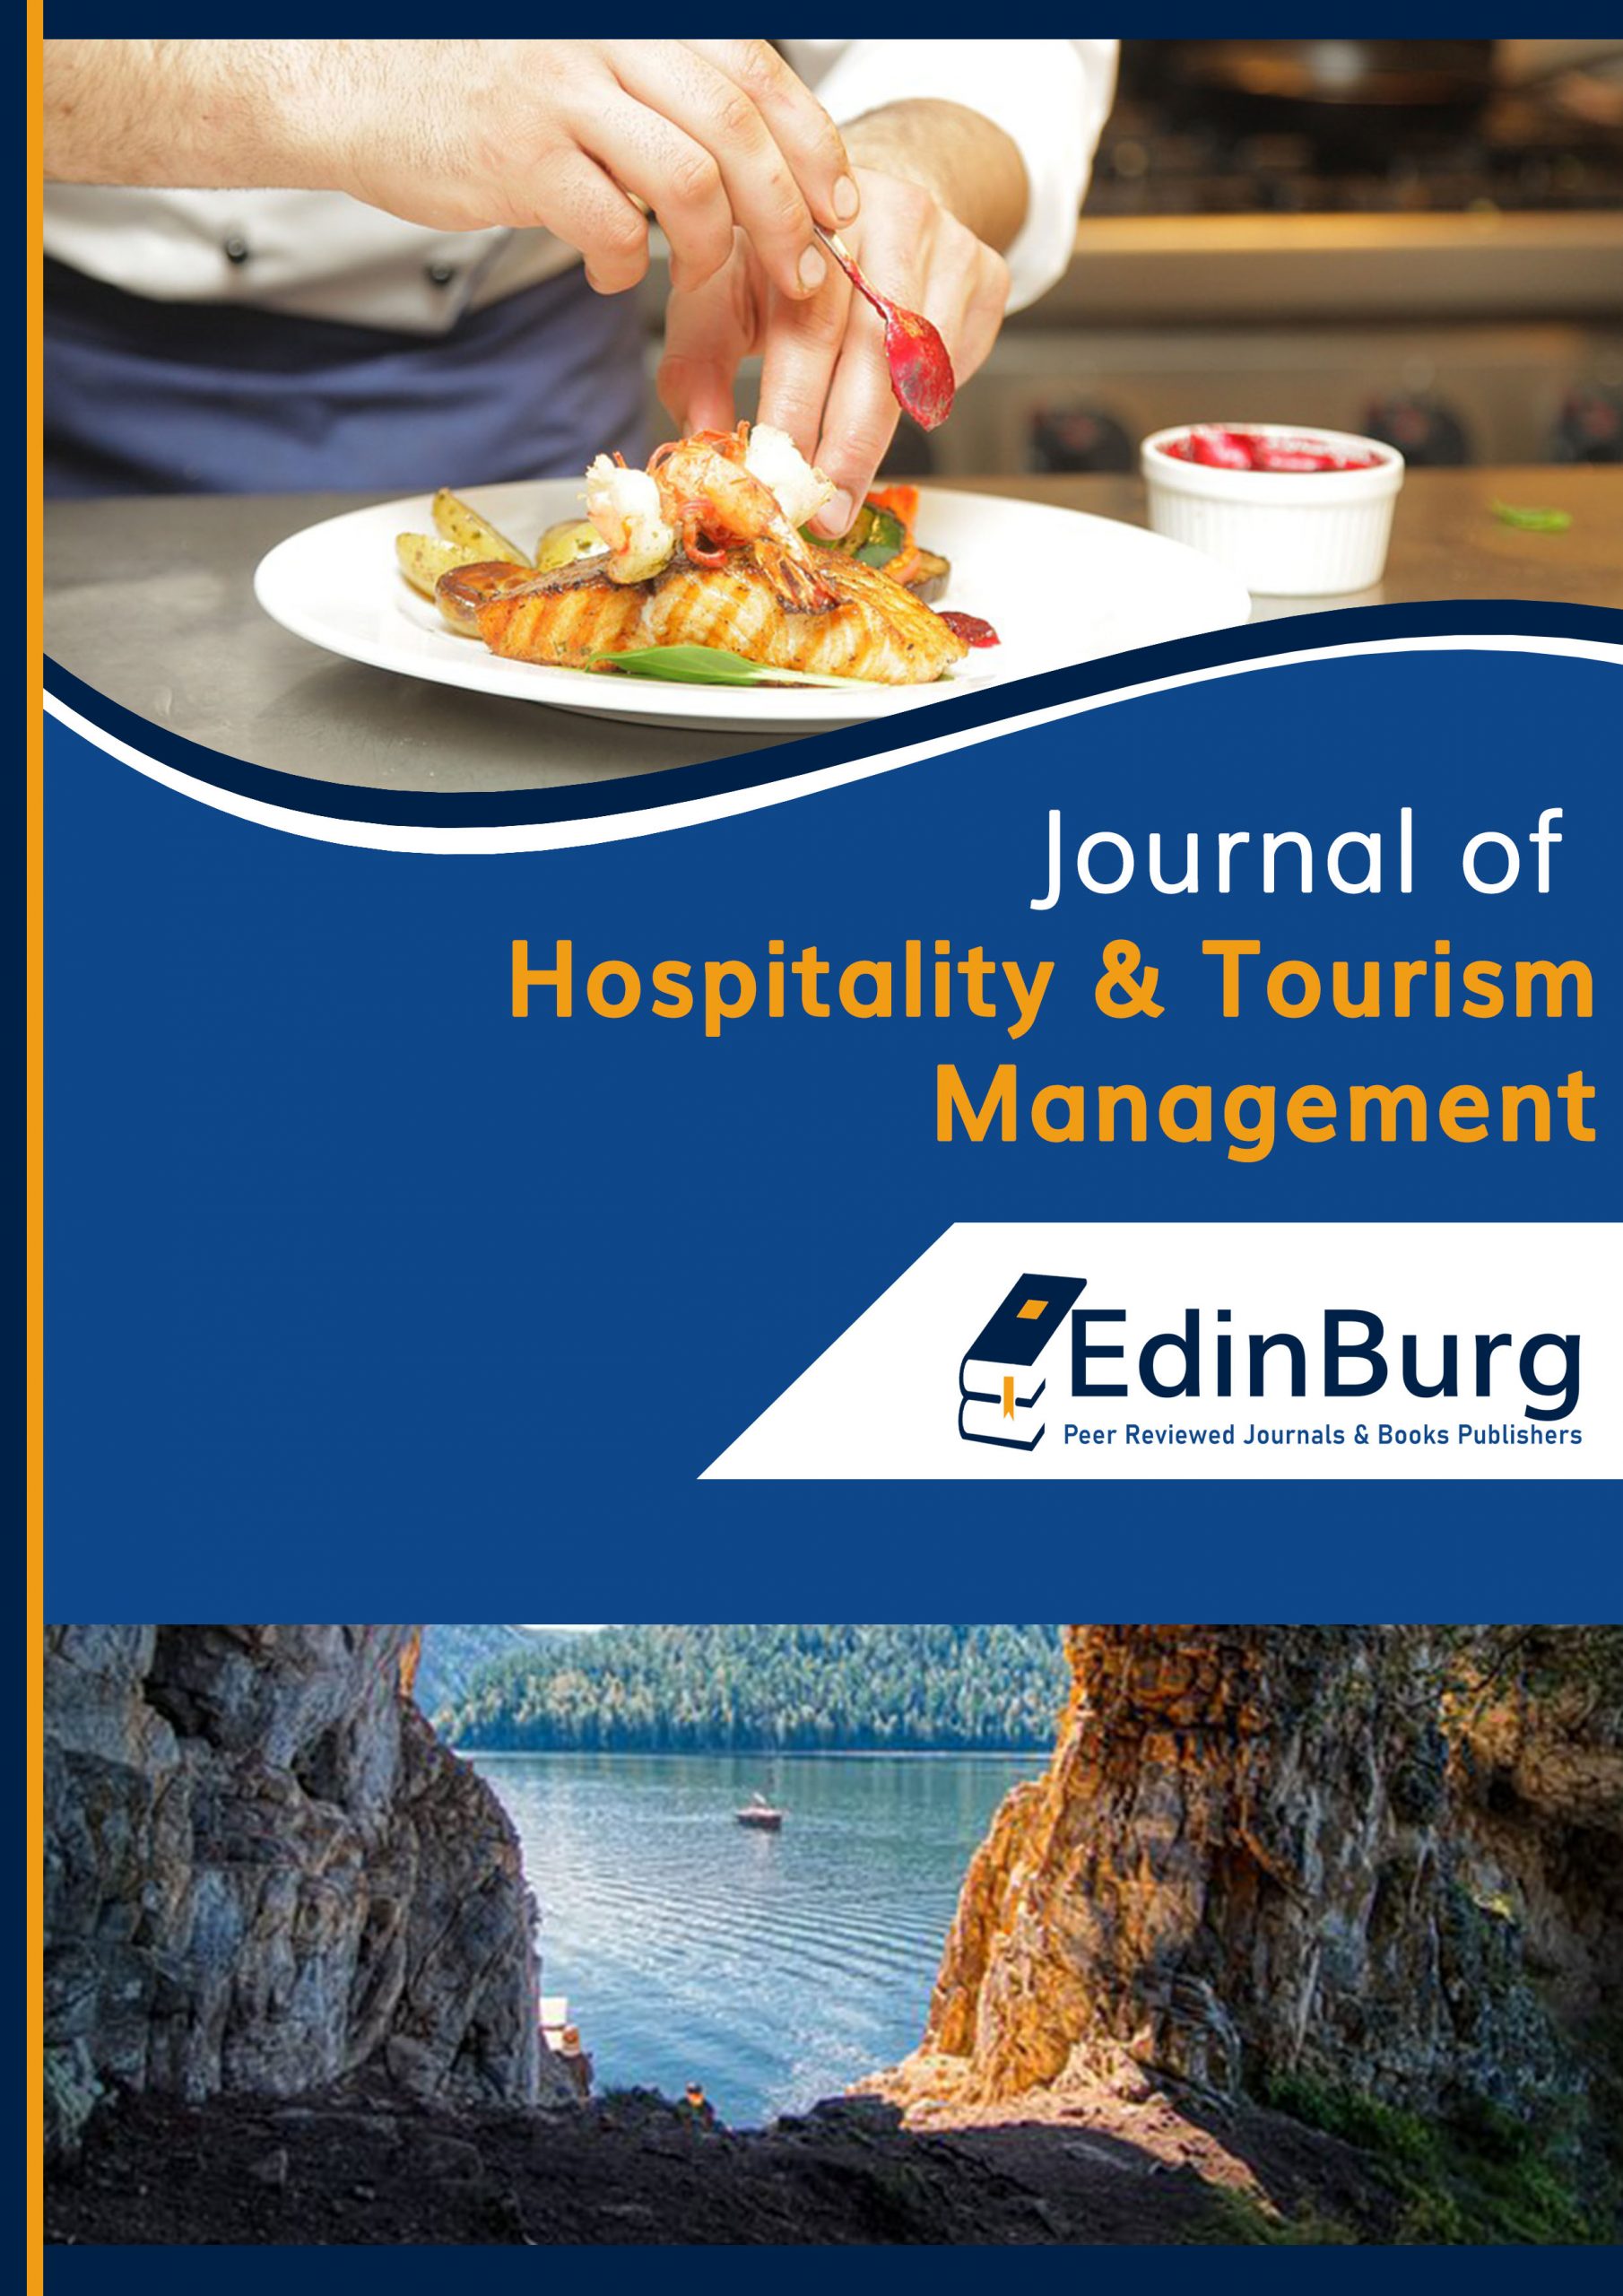 journal of tourism and hospitality management scimago